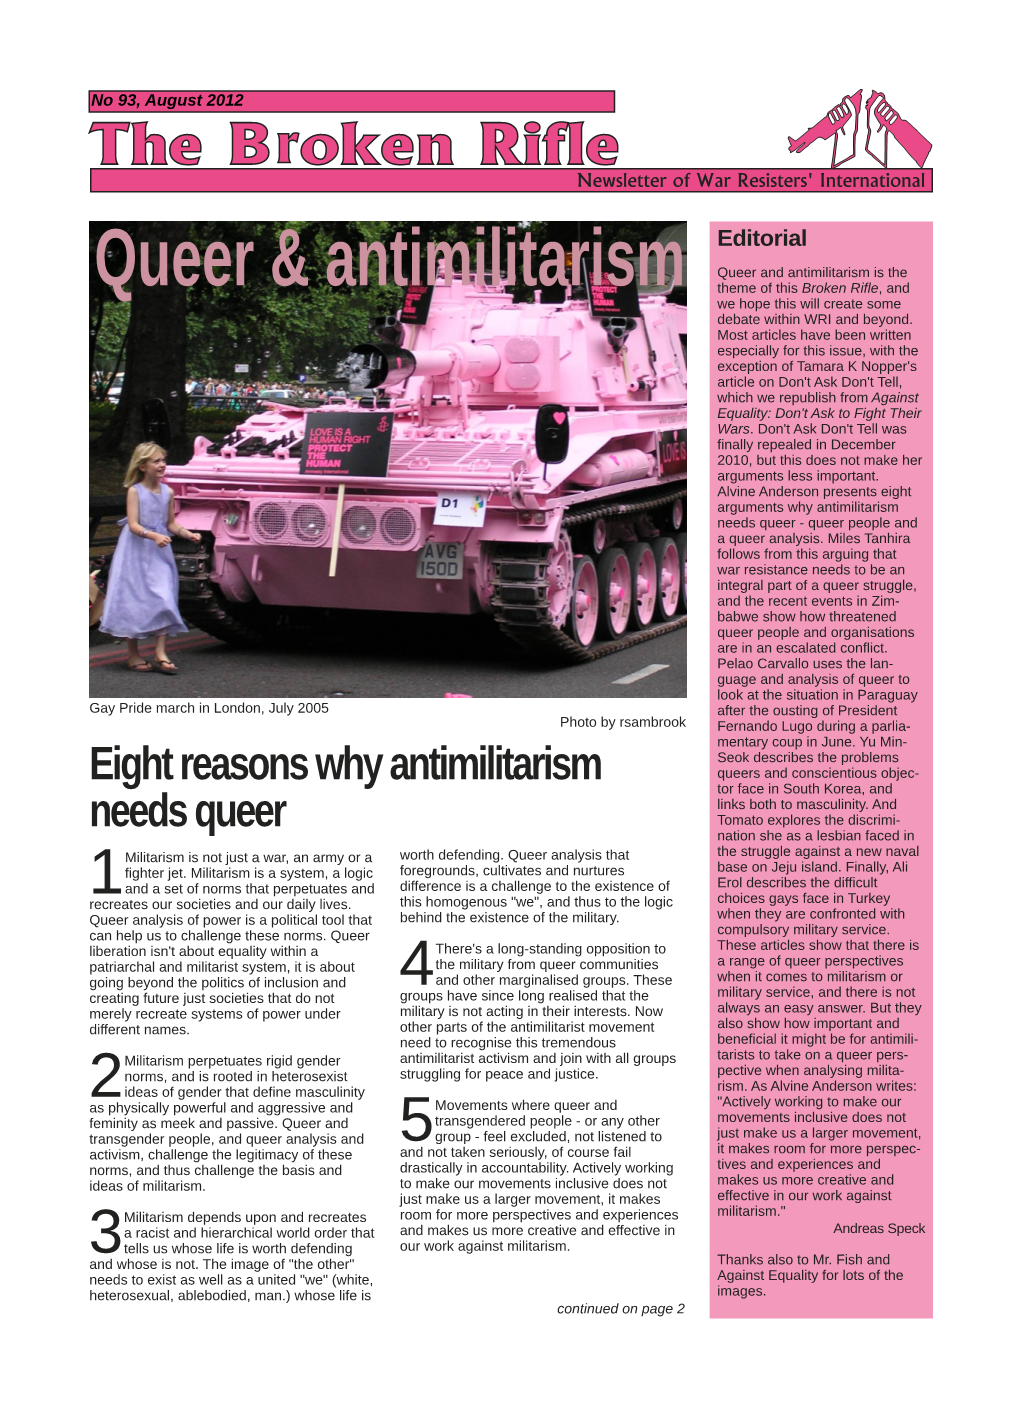 The Broken Rifle Newsletter: Queers and Anti-Militarism